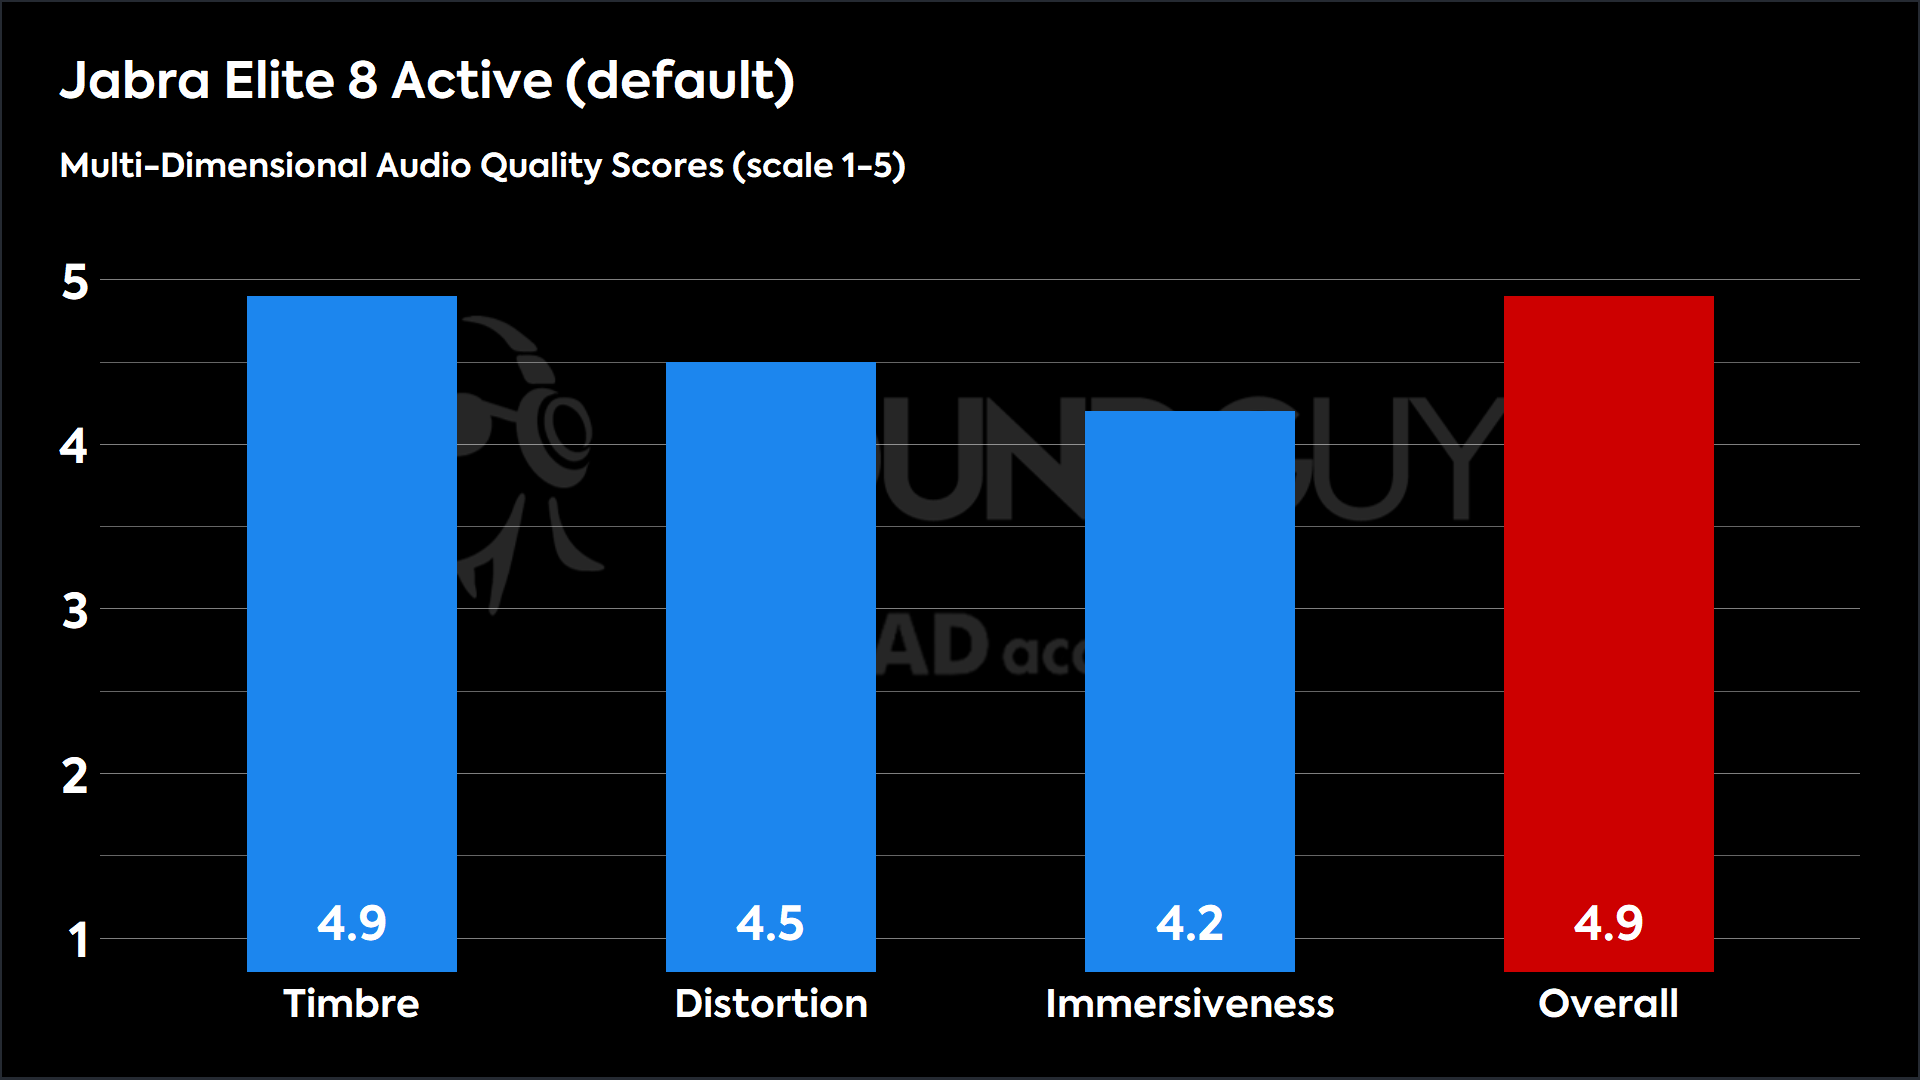 This chart shows the MDAQS results for the Jabra Elite 8 Active in default mode. The Timbre score is 4.9, The Distortion score is 4.5, the Immersiveness score is 4.2, and the Overall Score is 4.9).